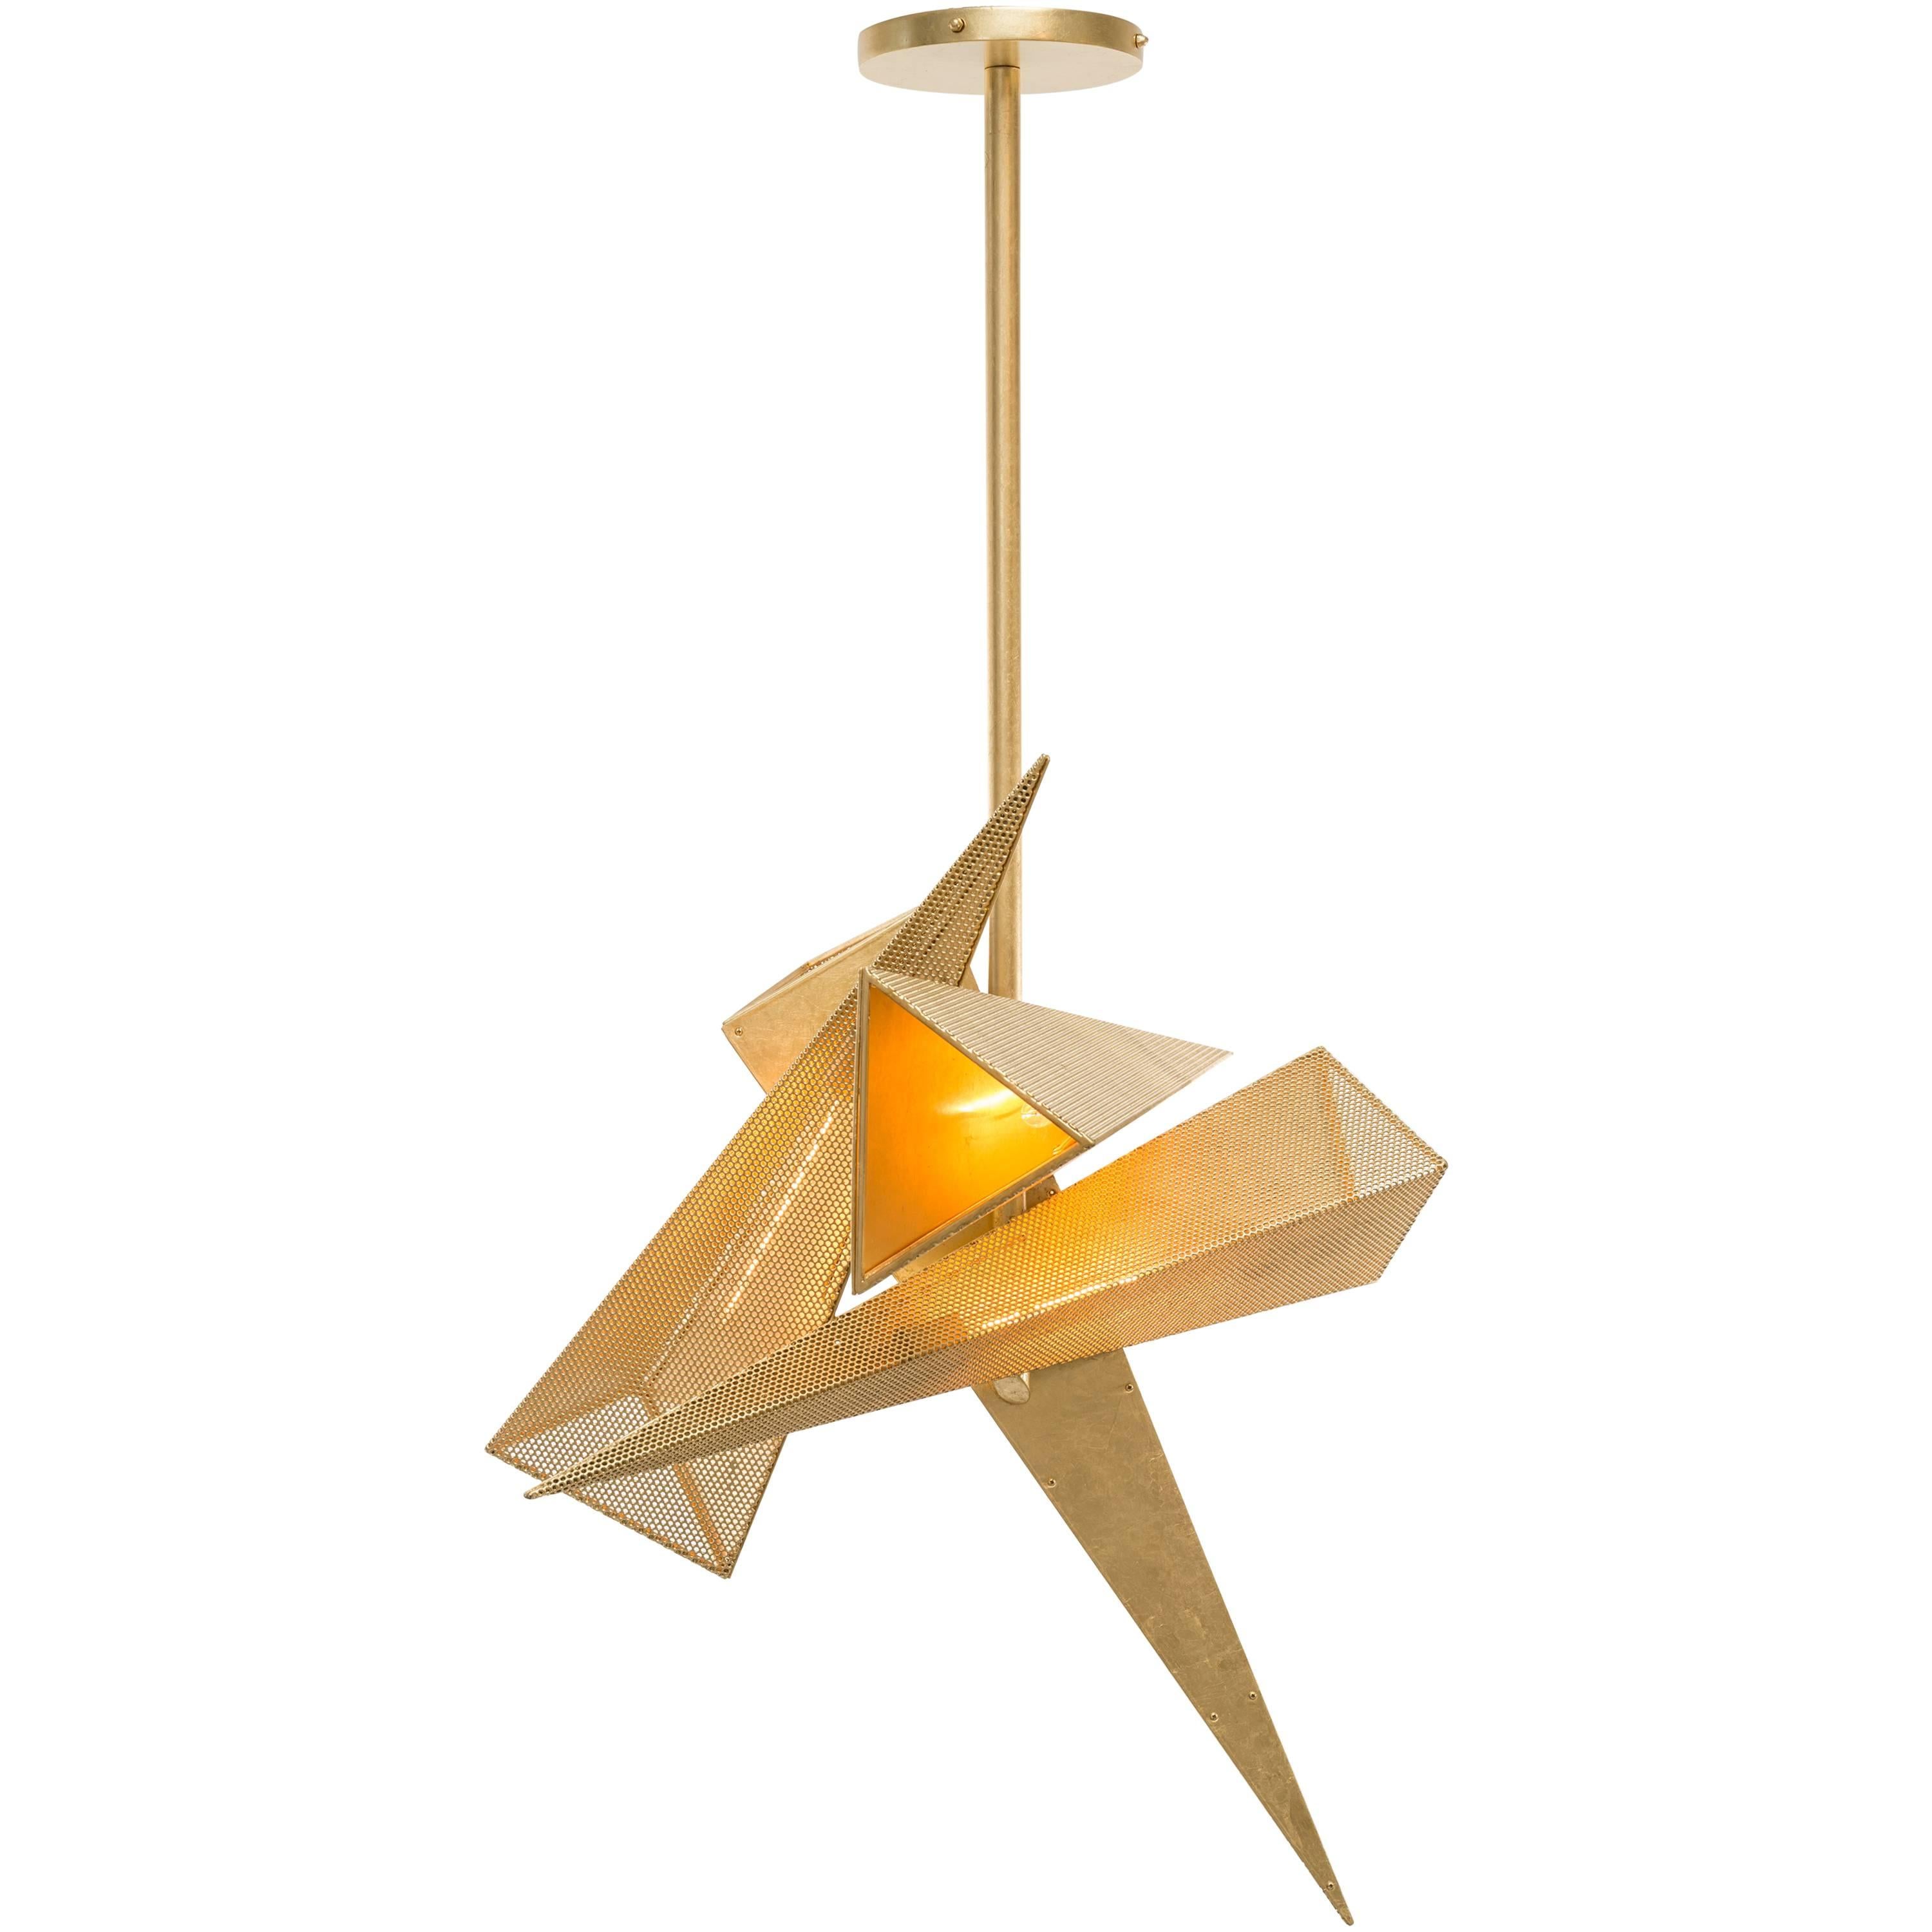 TRYSTAN CHANDELIER - Gold Leafed Perforated Steel Pyramids For Sale